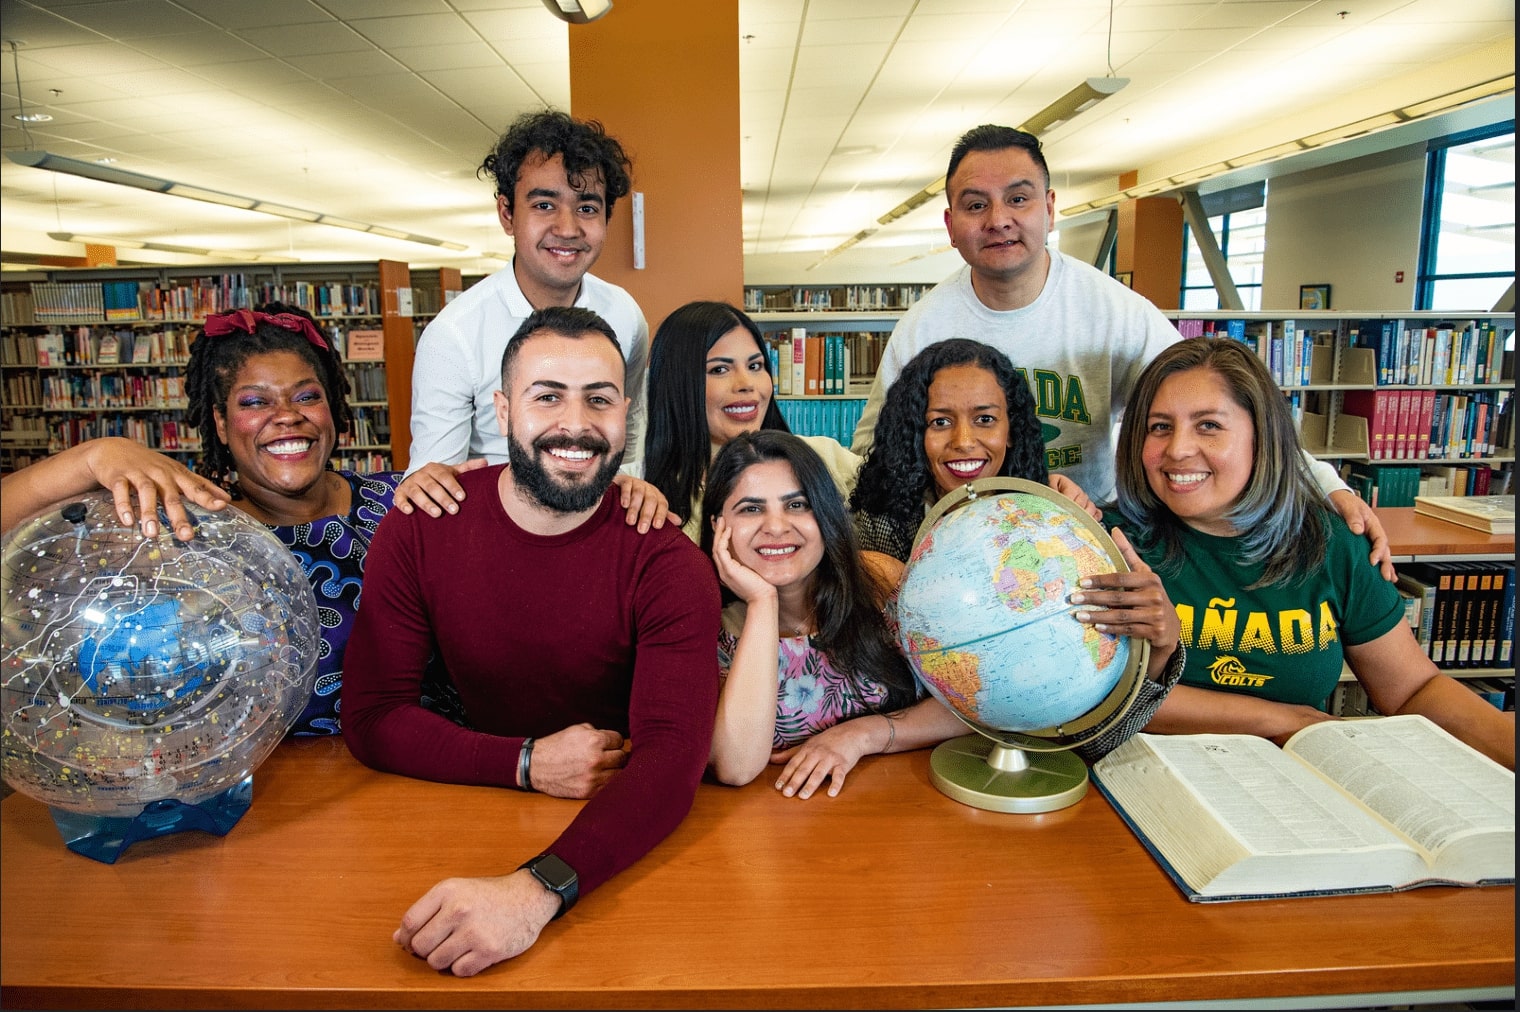 A group of students posing for a picture in the library